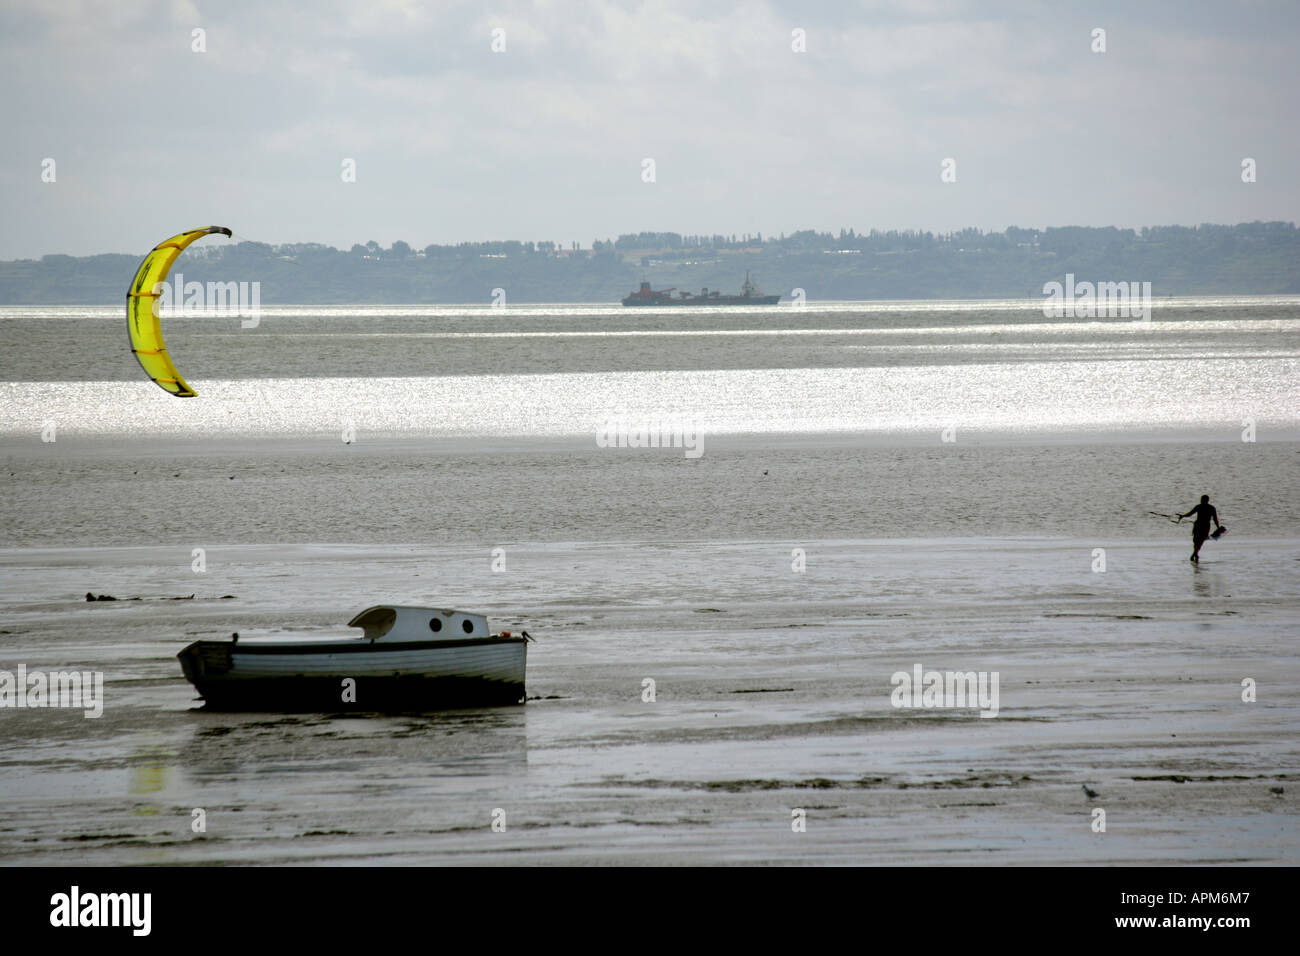 A kite boarding enthusiast making for deeper water Shoebury, Southend on Sea, Essex, England, UK. Stock Photo